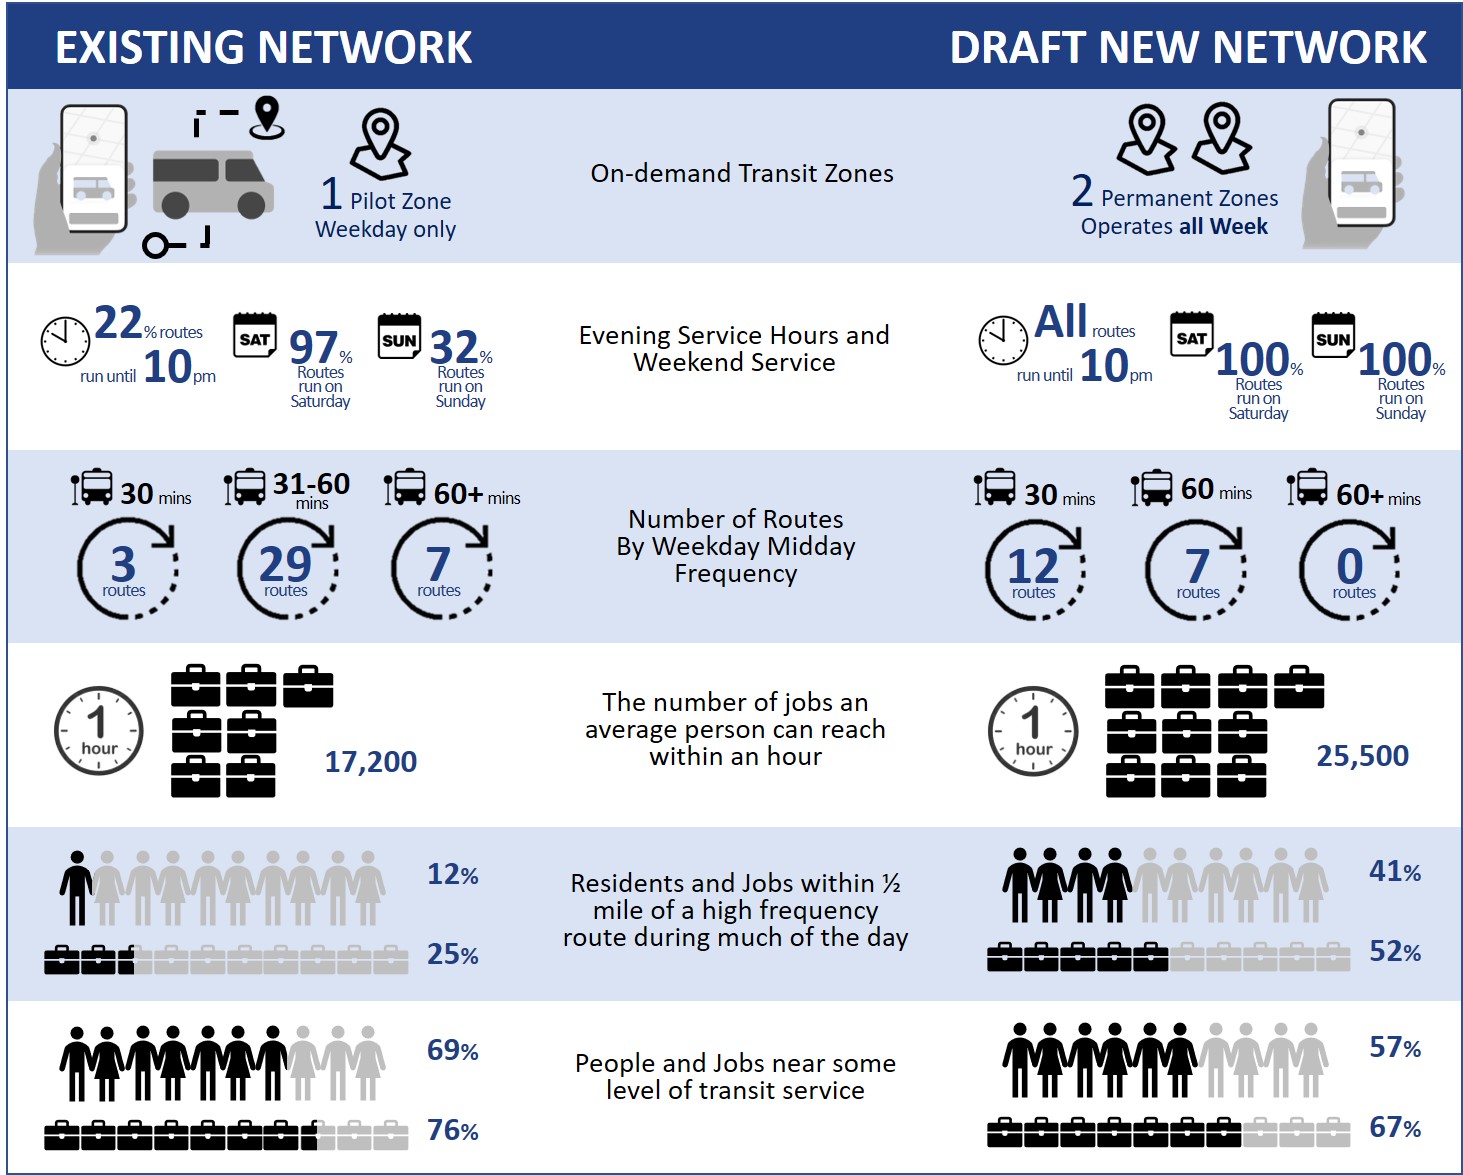 a chart showing the differences between the existing and draft networks